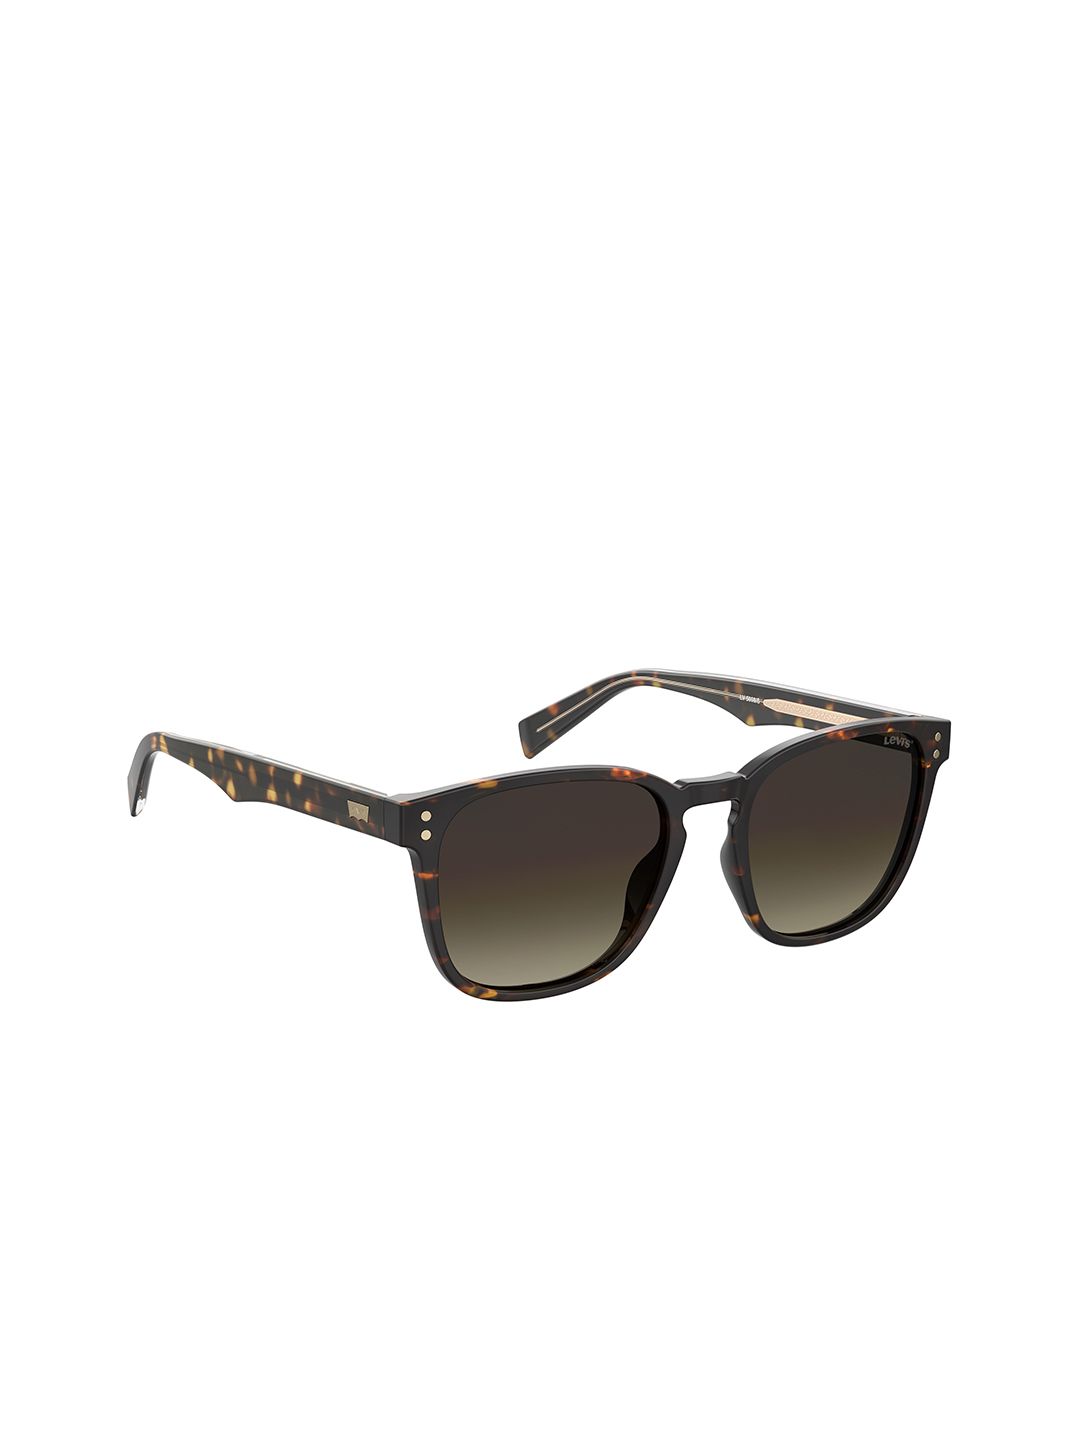 Levis Unisex Brown Lens & Brown Aviator Sunglasses with UV Protected Lens Price in India